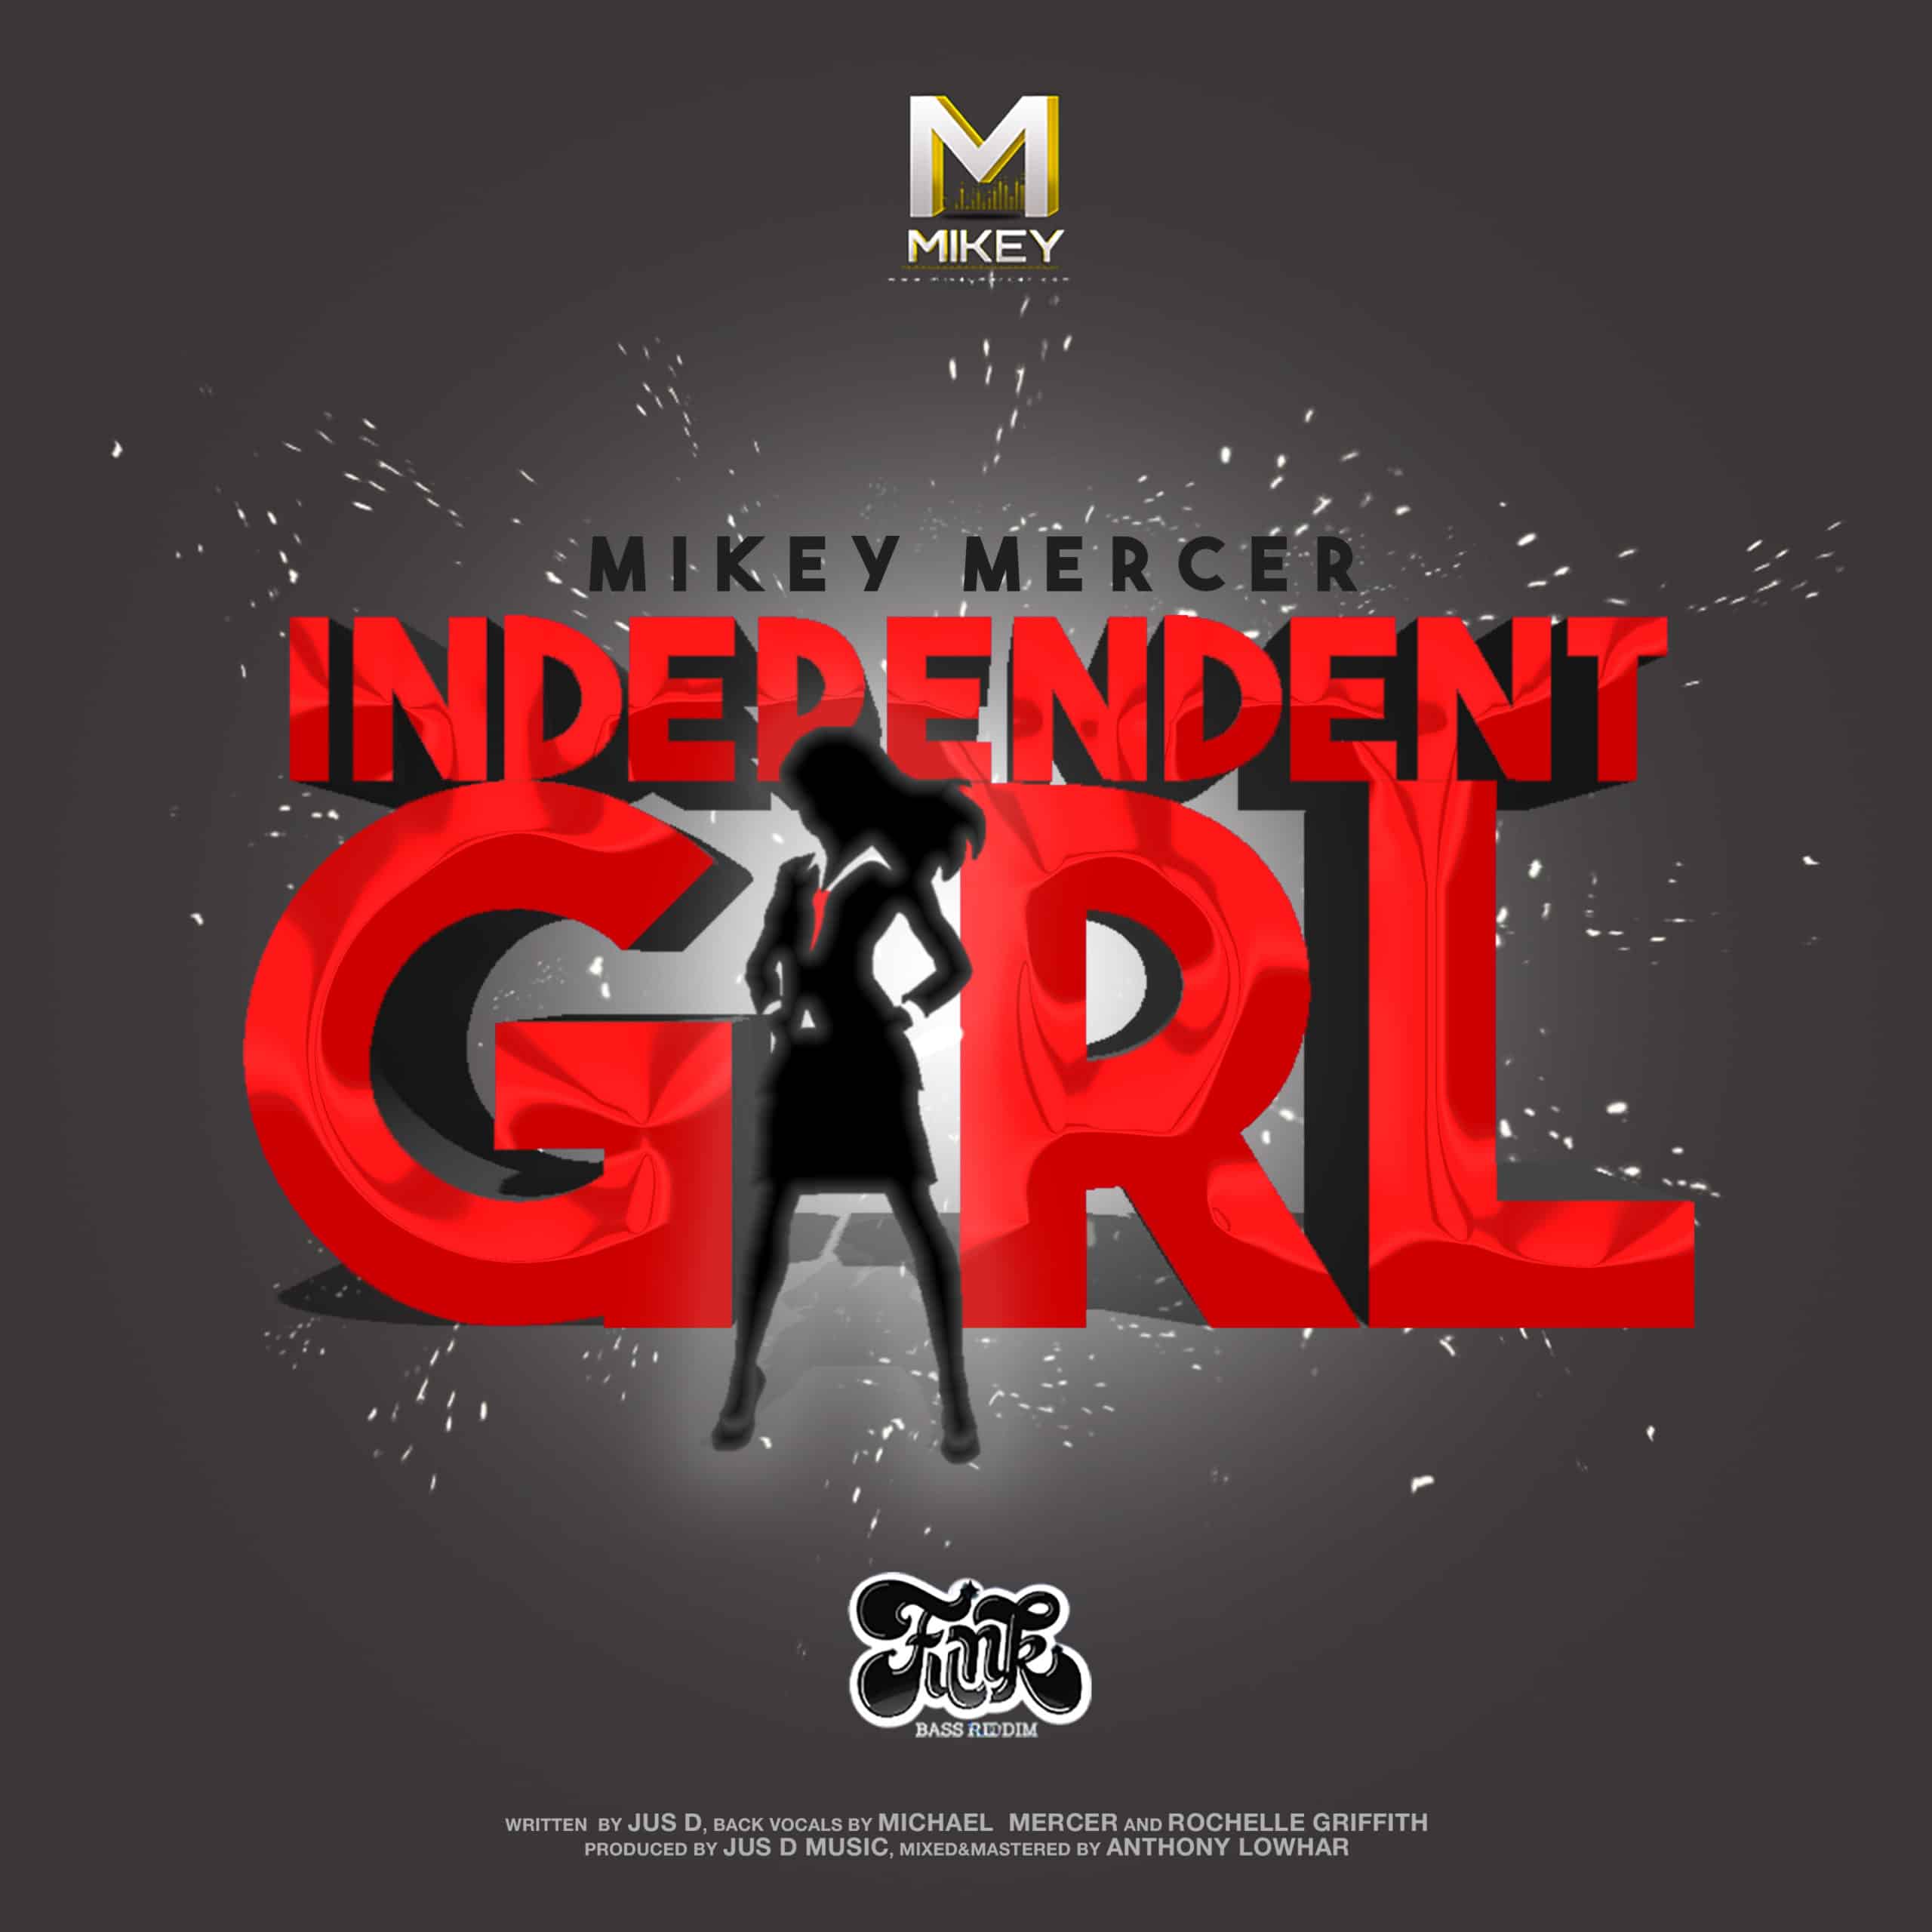 Mikey Mercer - INDEPENDENT GIRL